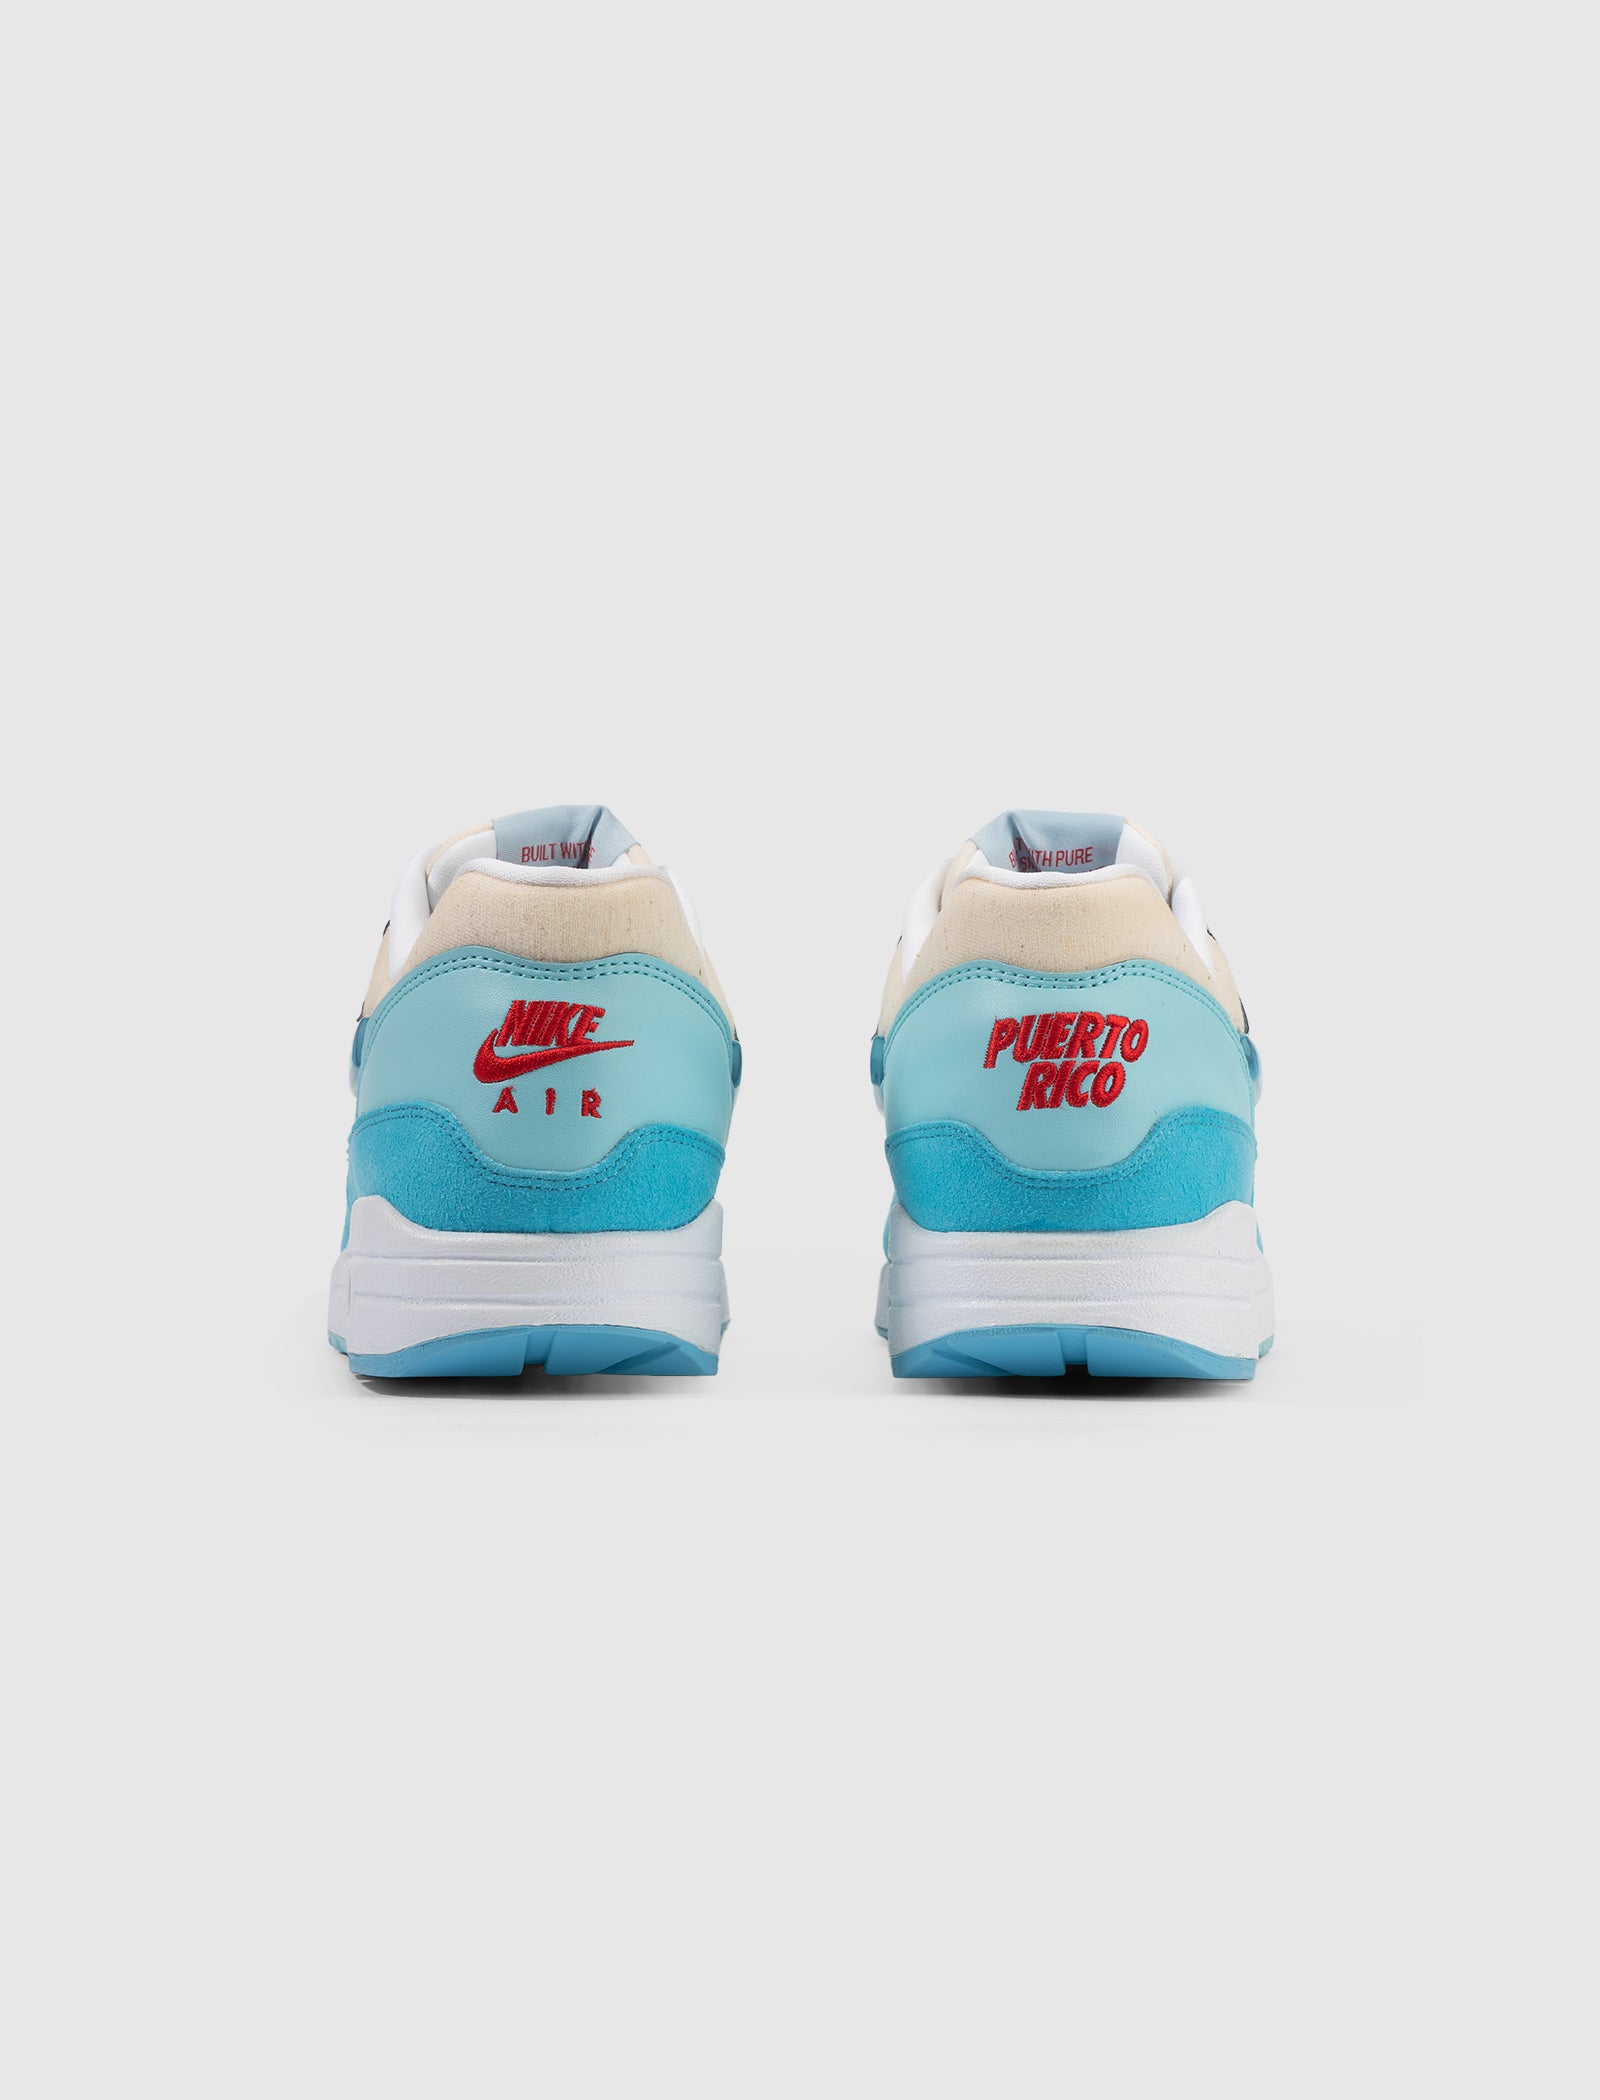 AIR MAX 1 PUERTO RICO DAY "BLUE GALE"